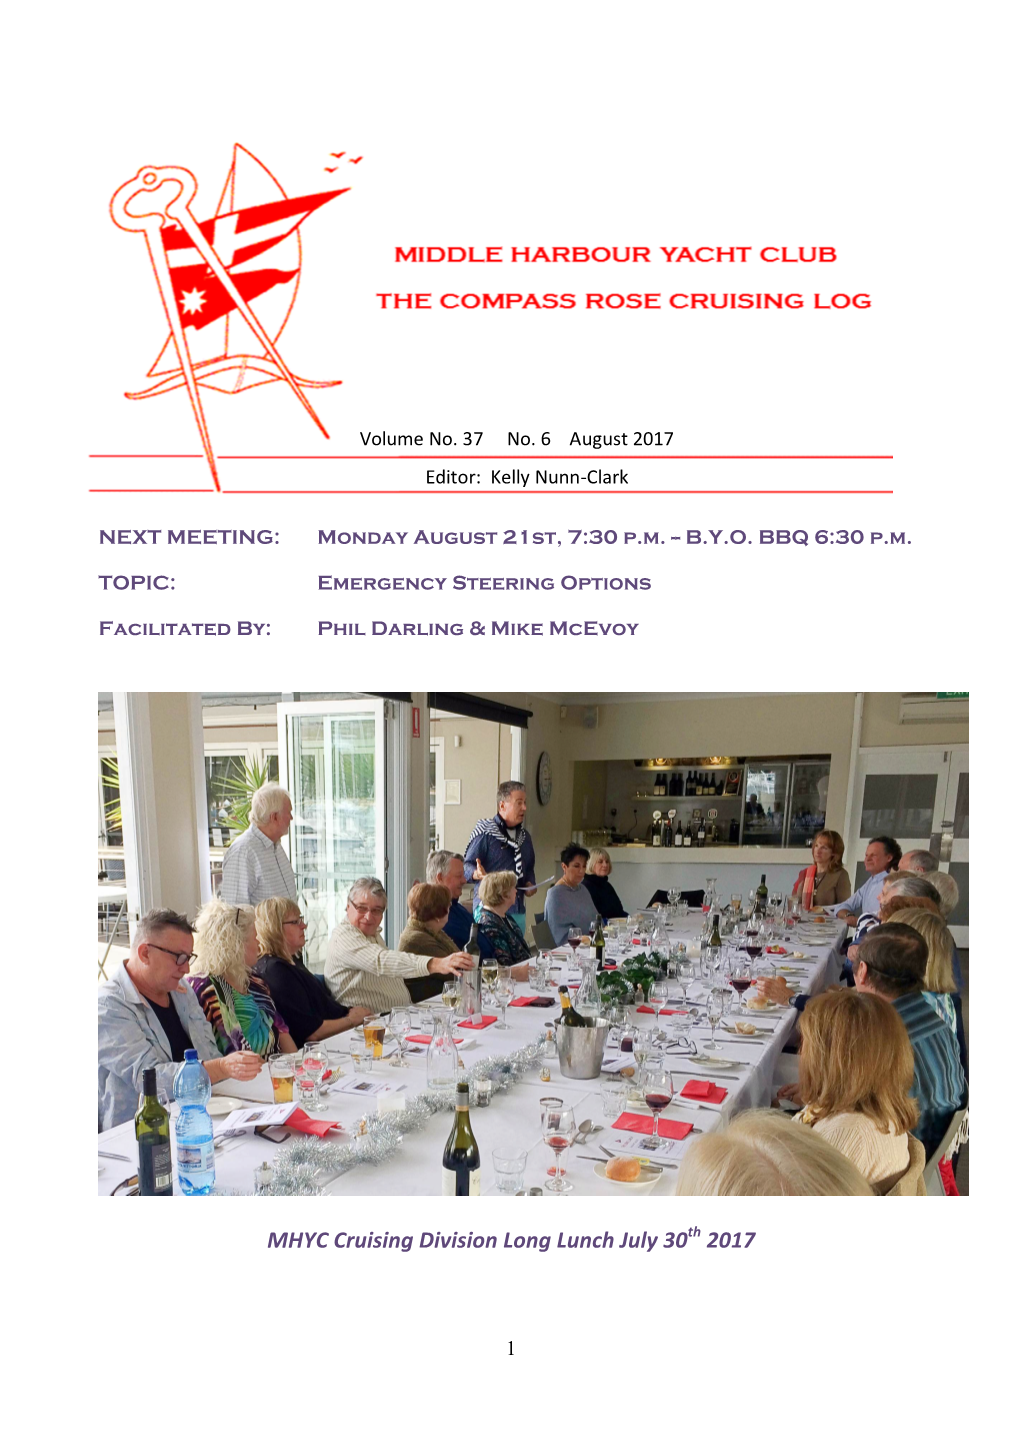 MHYC Cruising Division Long Lunch July 30Th 2017